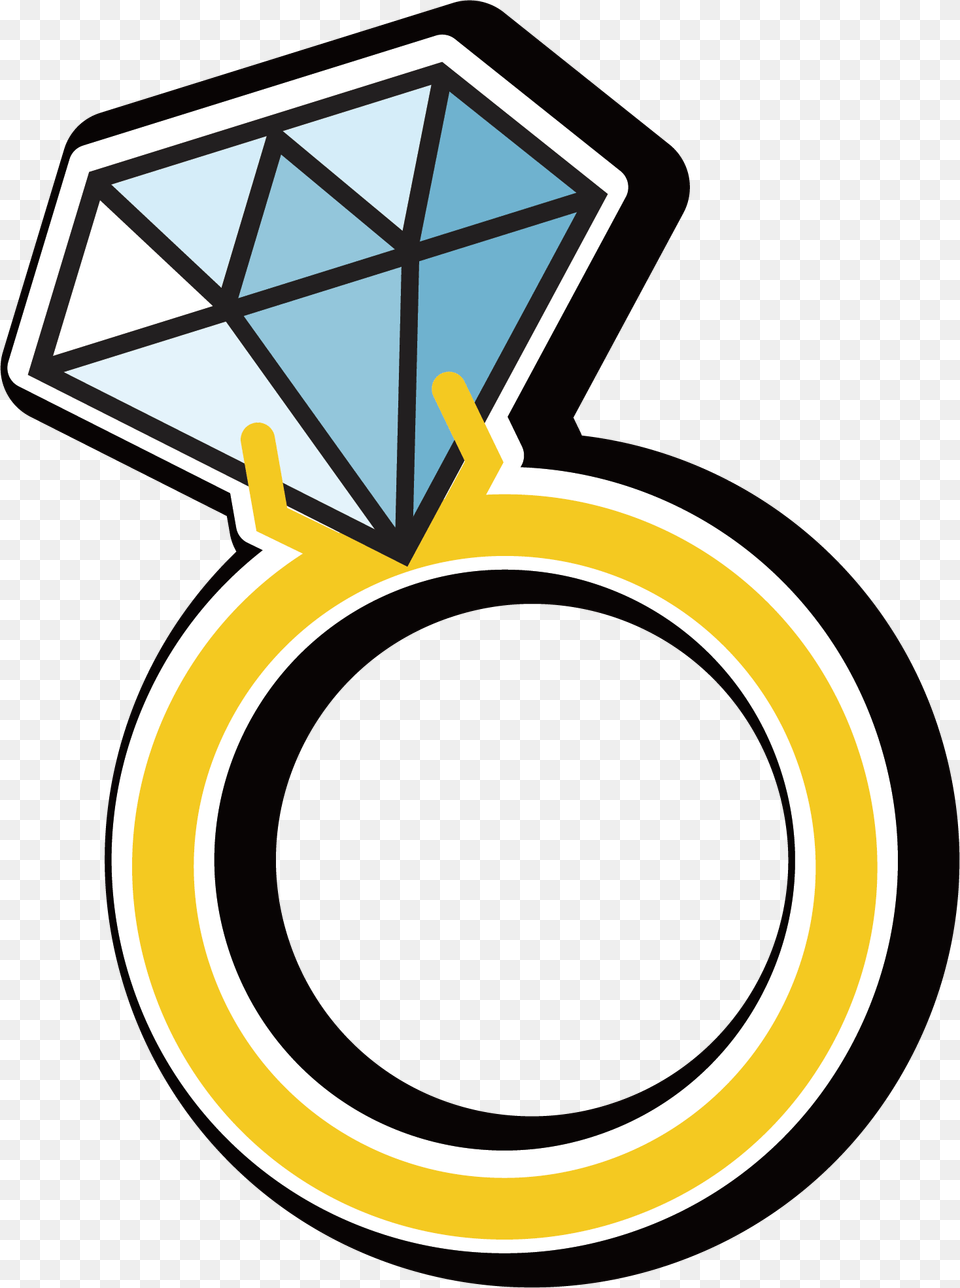 Blue Ring Diamond Gemstone Vector Hd Image Diamond Ring Vector, Accessories, Jewelry, Ammunition, Grenade Free Transparent Png